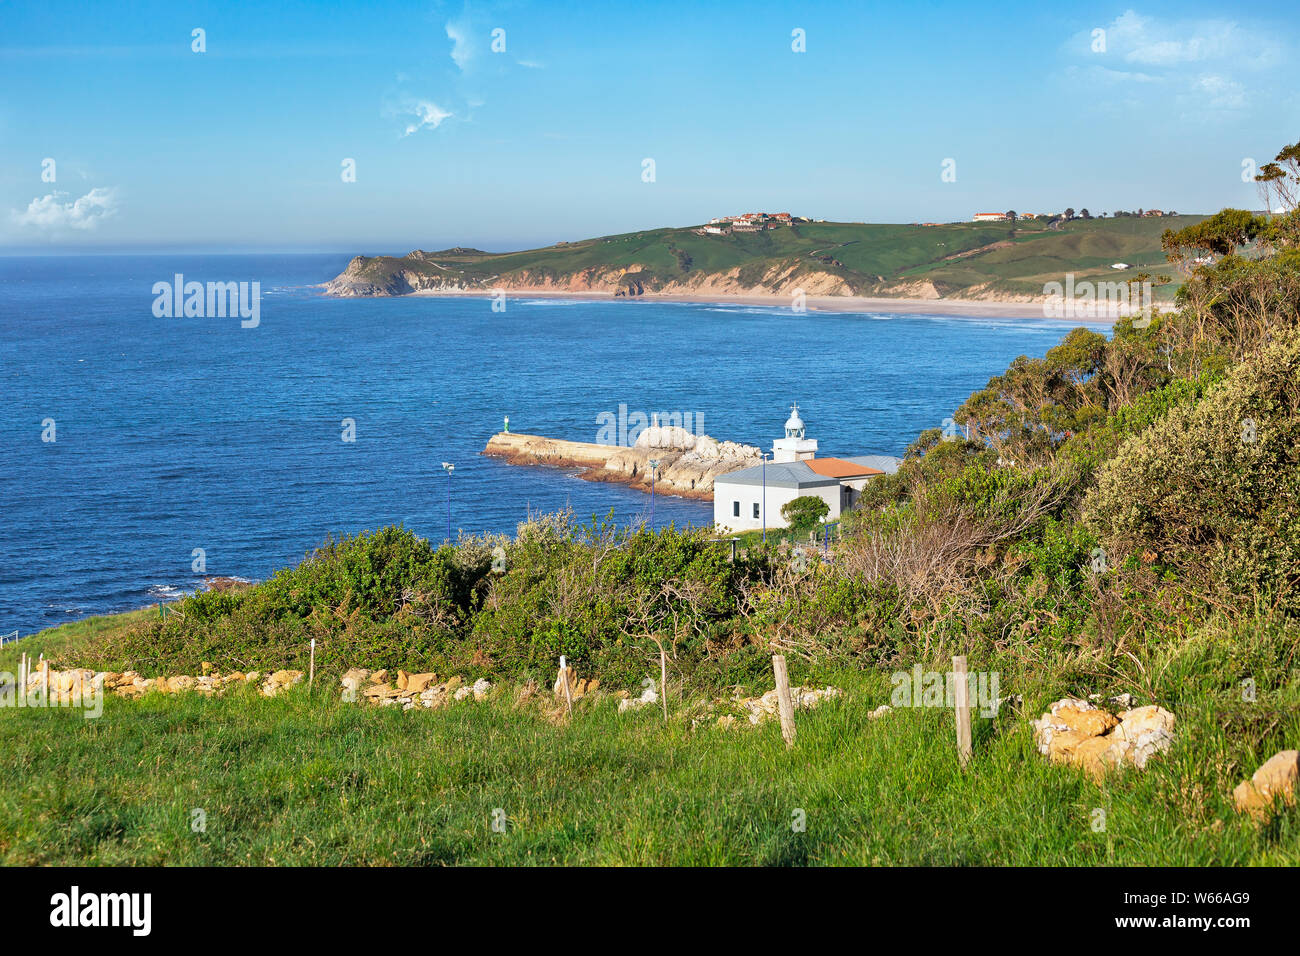 Lighthouse on the Bay of Biscay, Spain Stock Photo